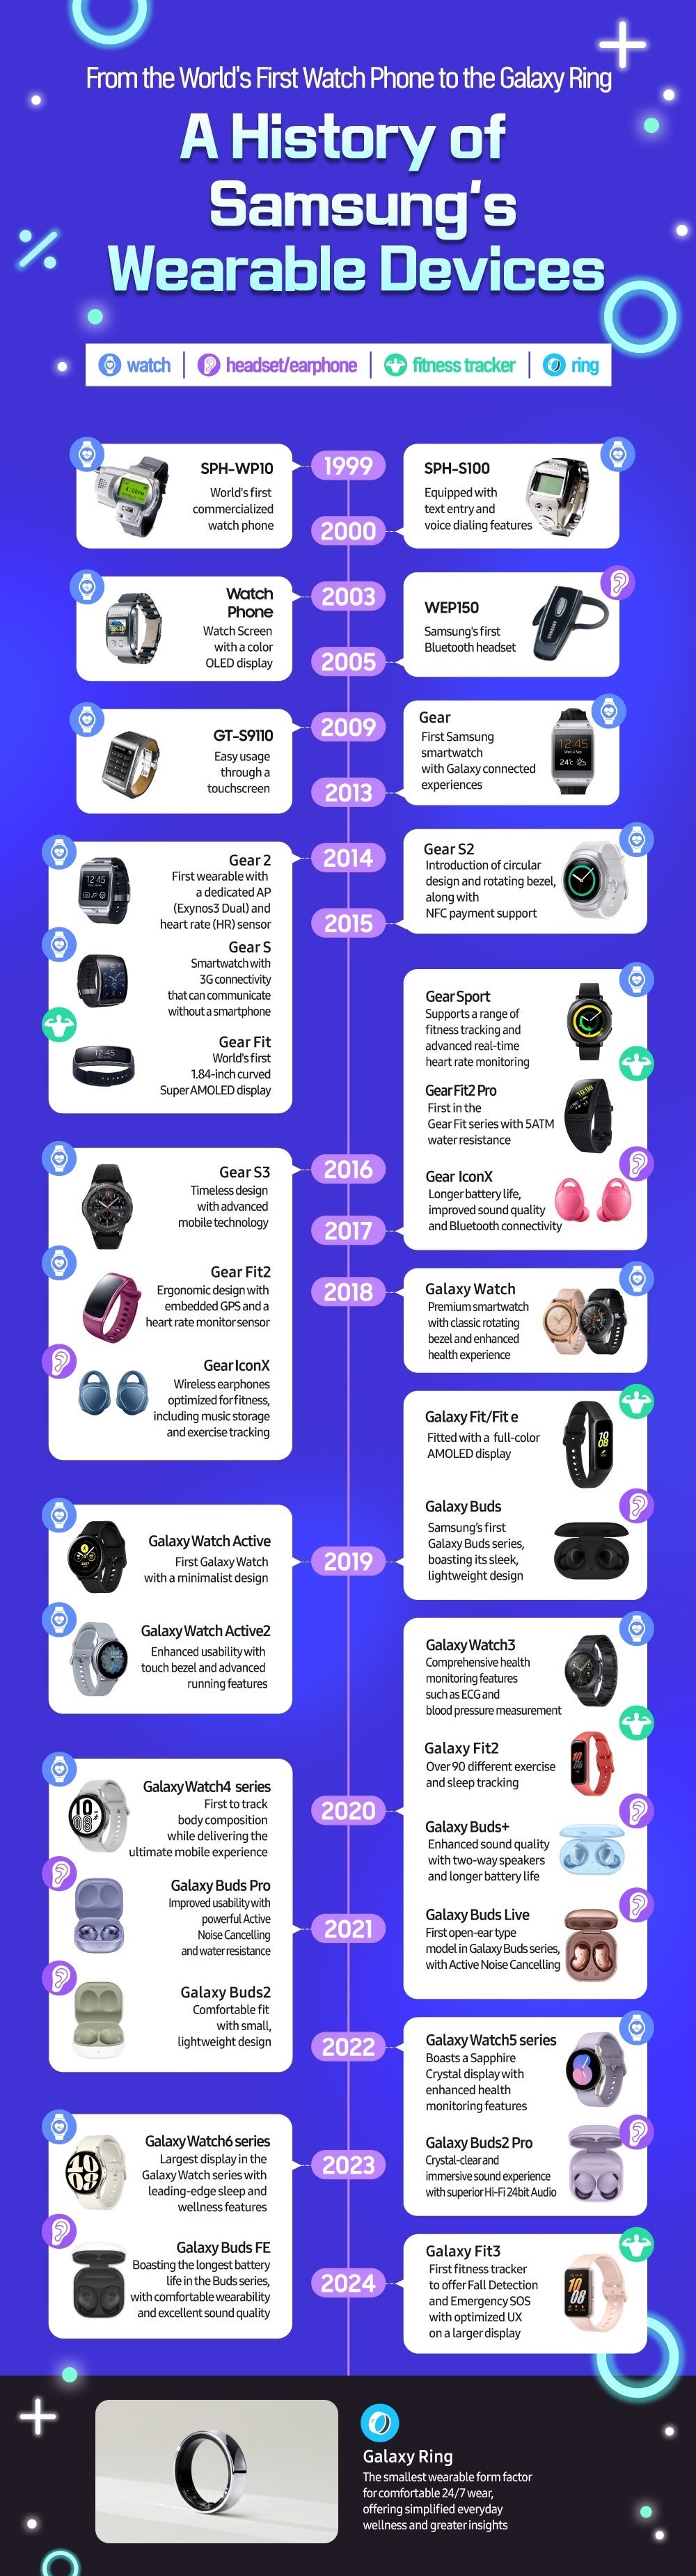 Infographic: 25 years of Samsung wearable device evolution